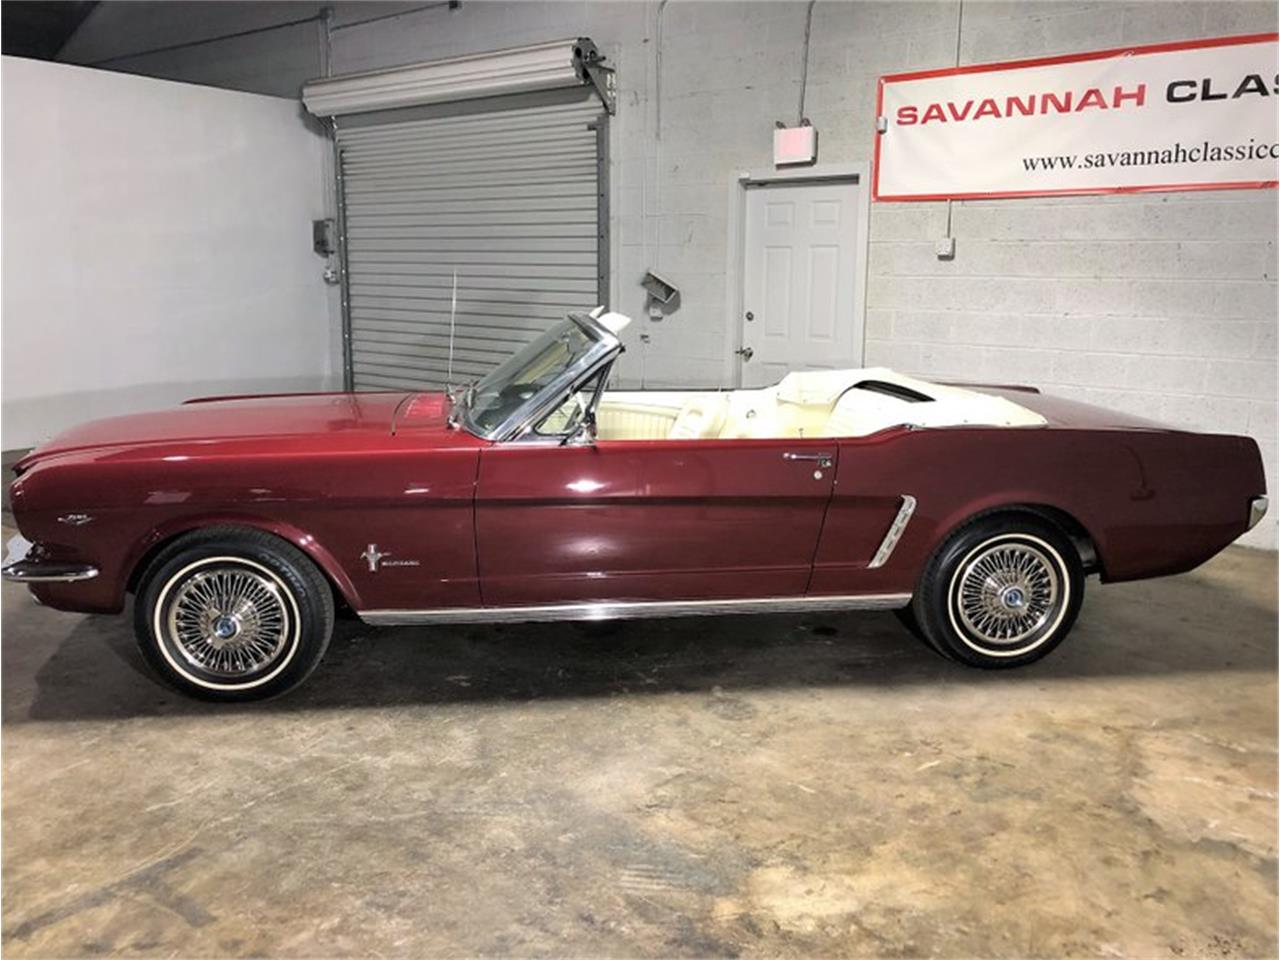 1965 Ford Mustang for sale in Savannah, GA / classiccarsbay.com